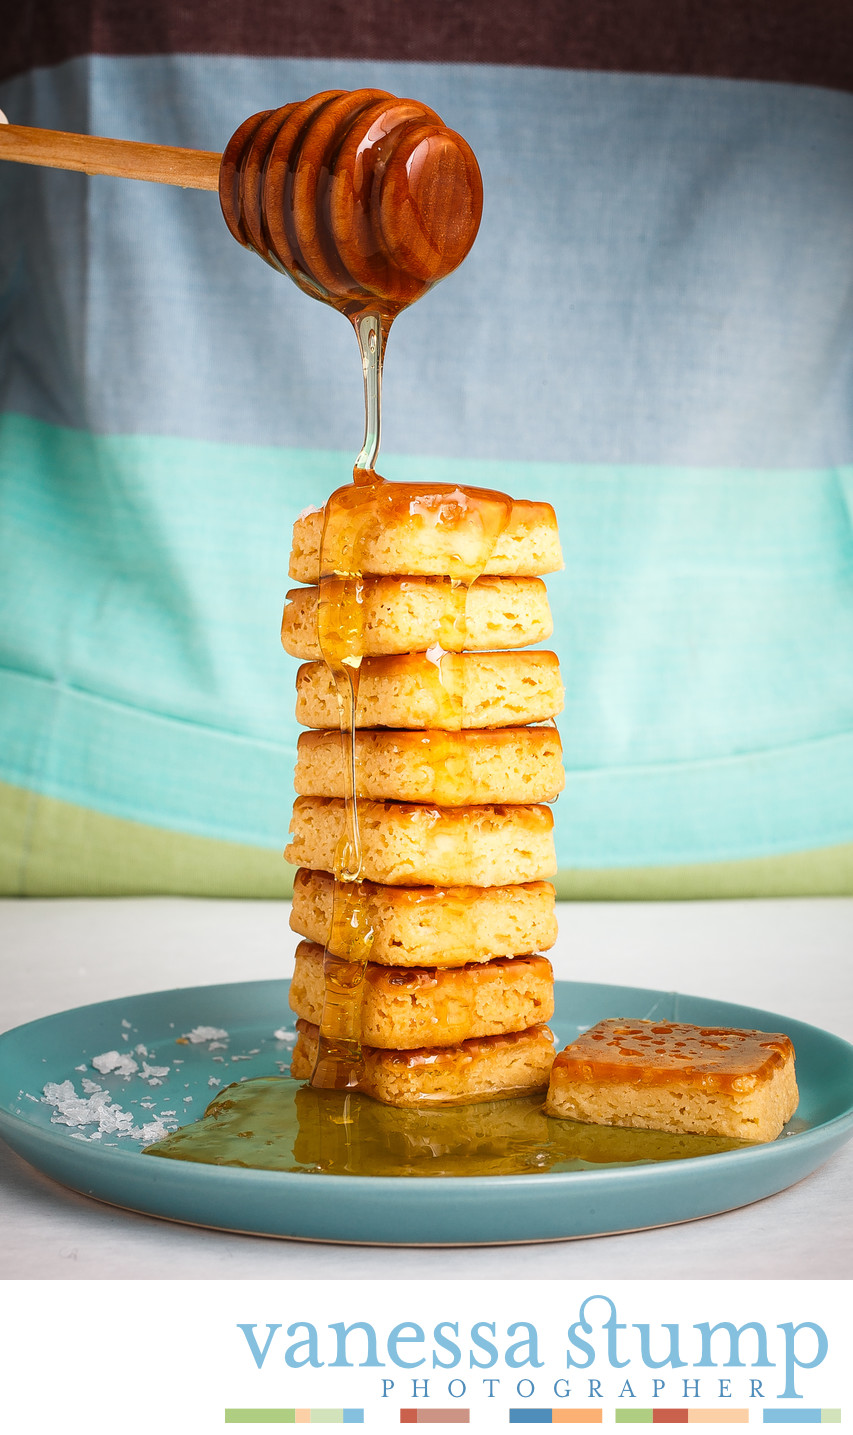 Fruute salted caramel cookie with honey drizzle and sea salt